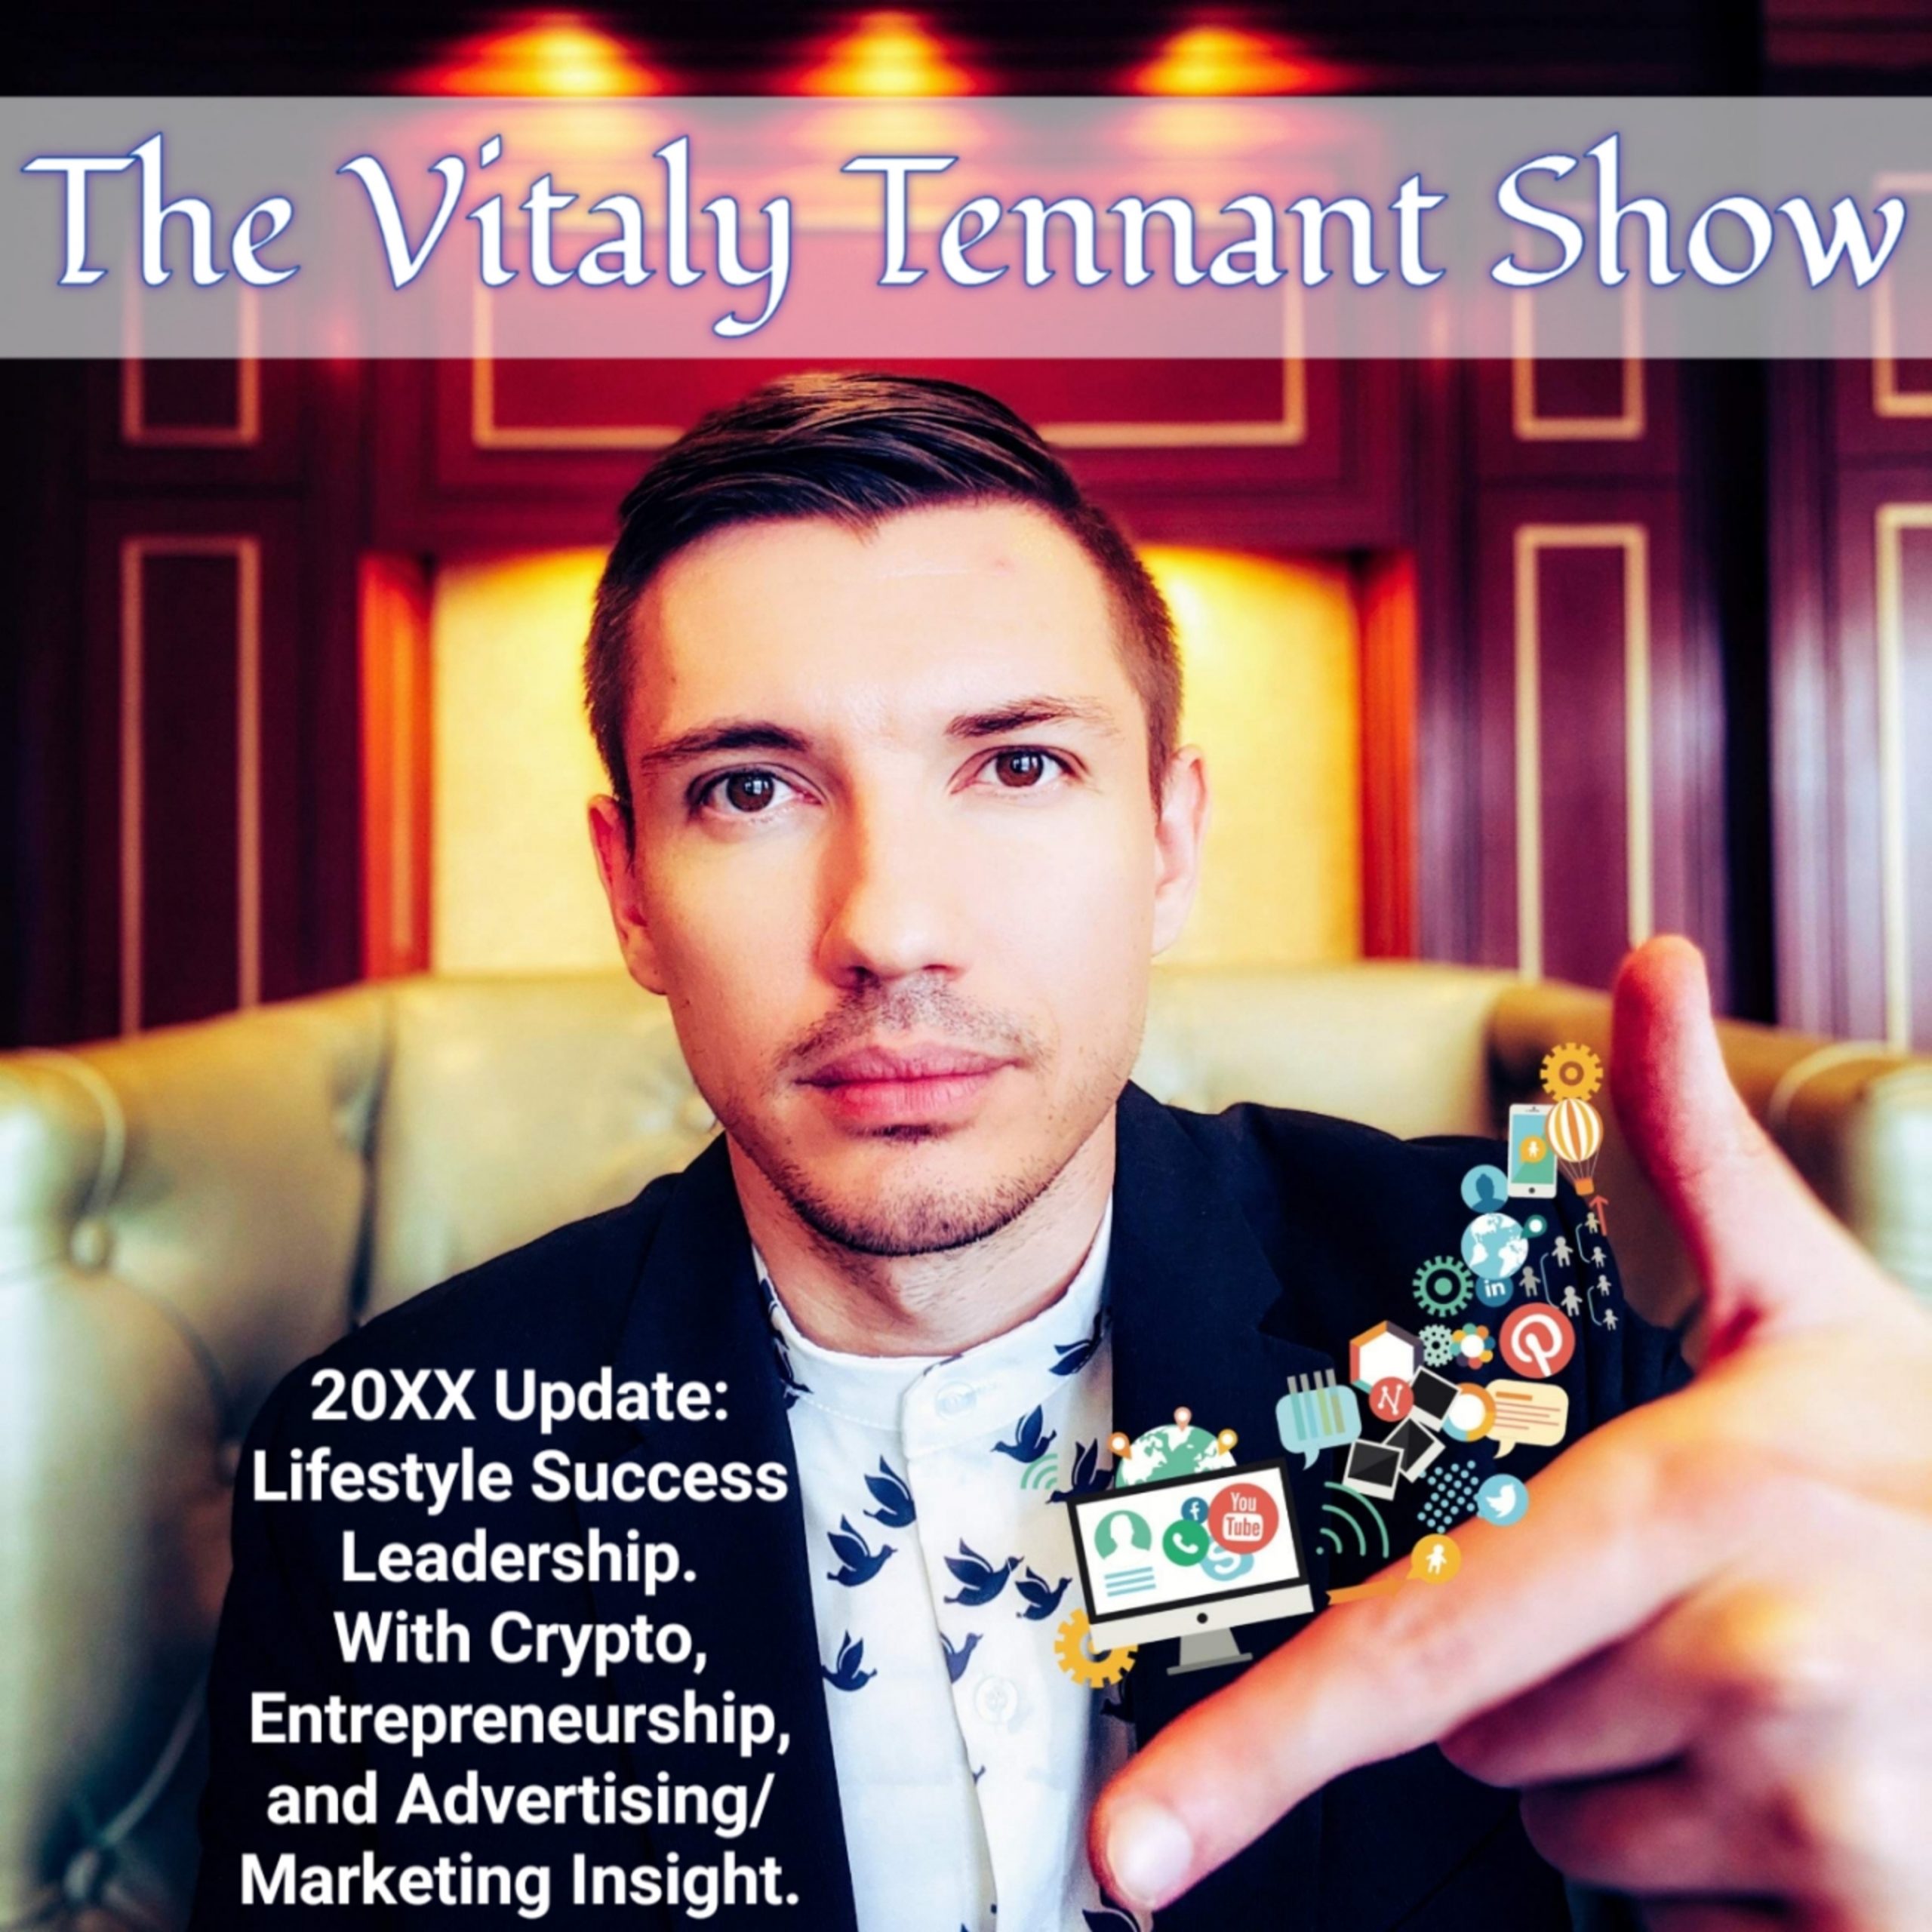 The Vitaly Tennant Show Updating